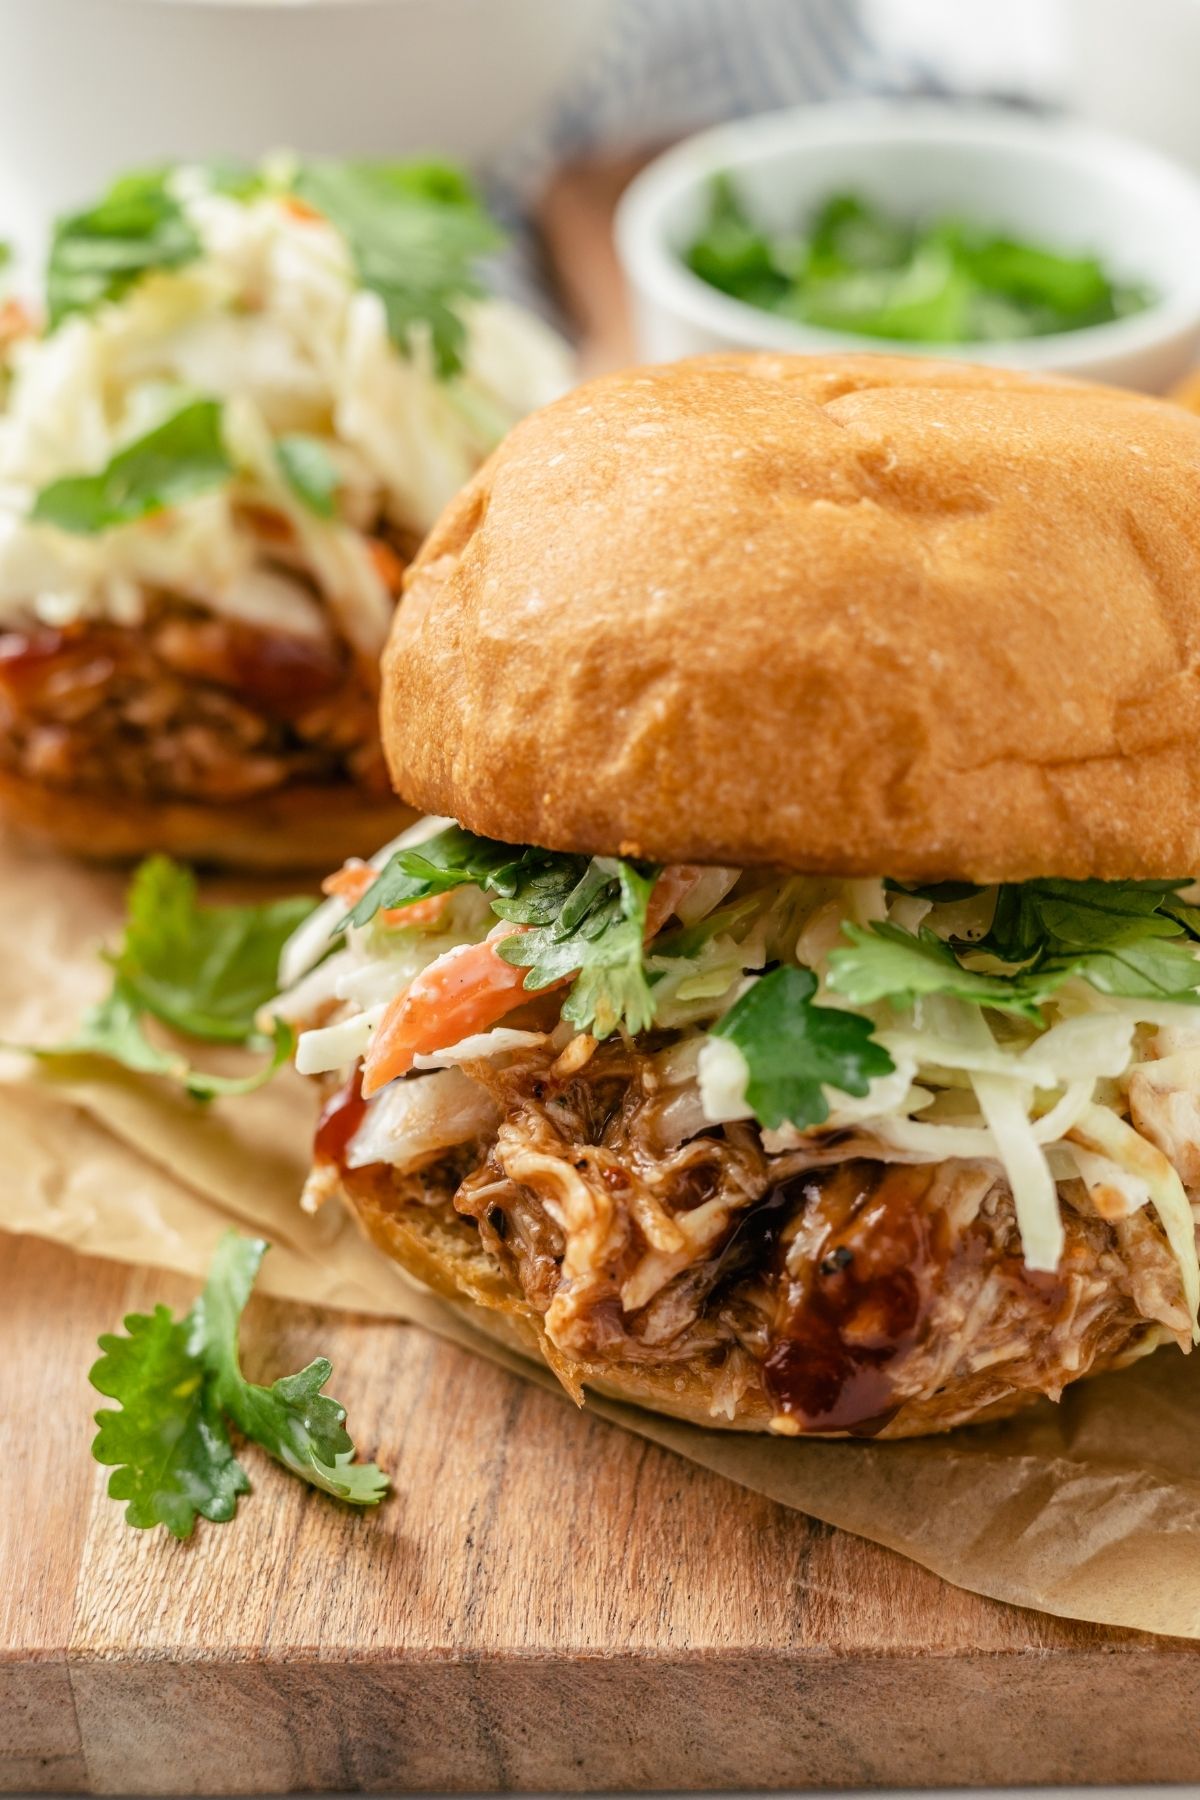 Tasty and satisfying BBQ chicken sliders on sweet Hawaiian rolls with coleslaw and cilantro